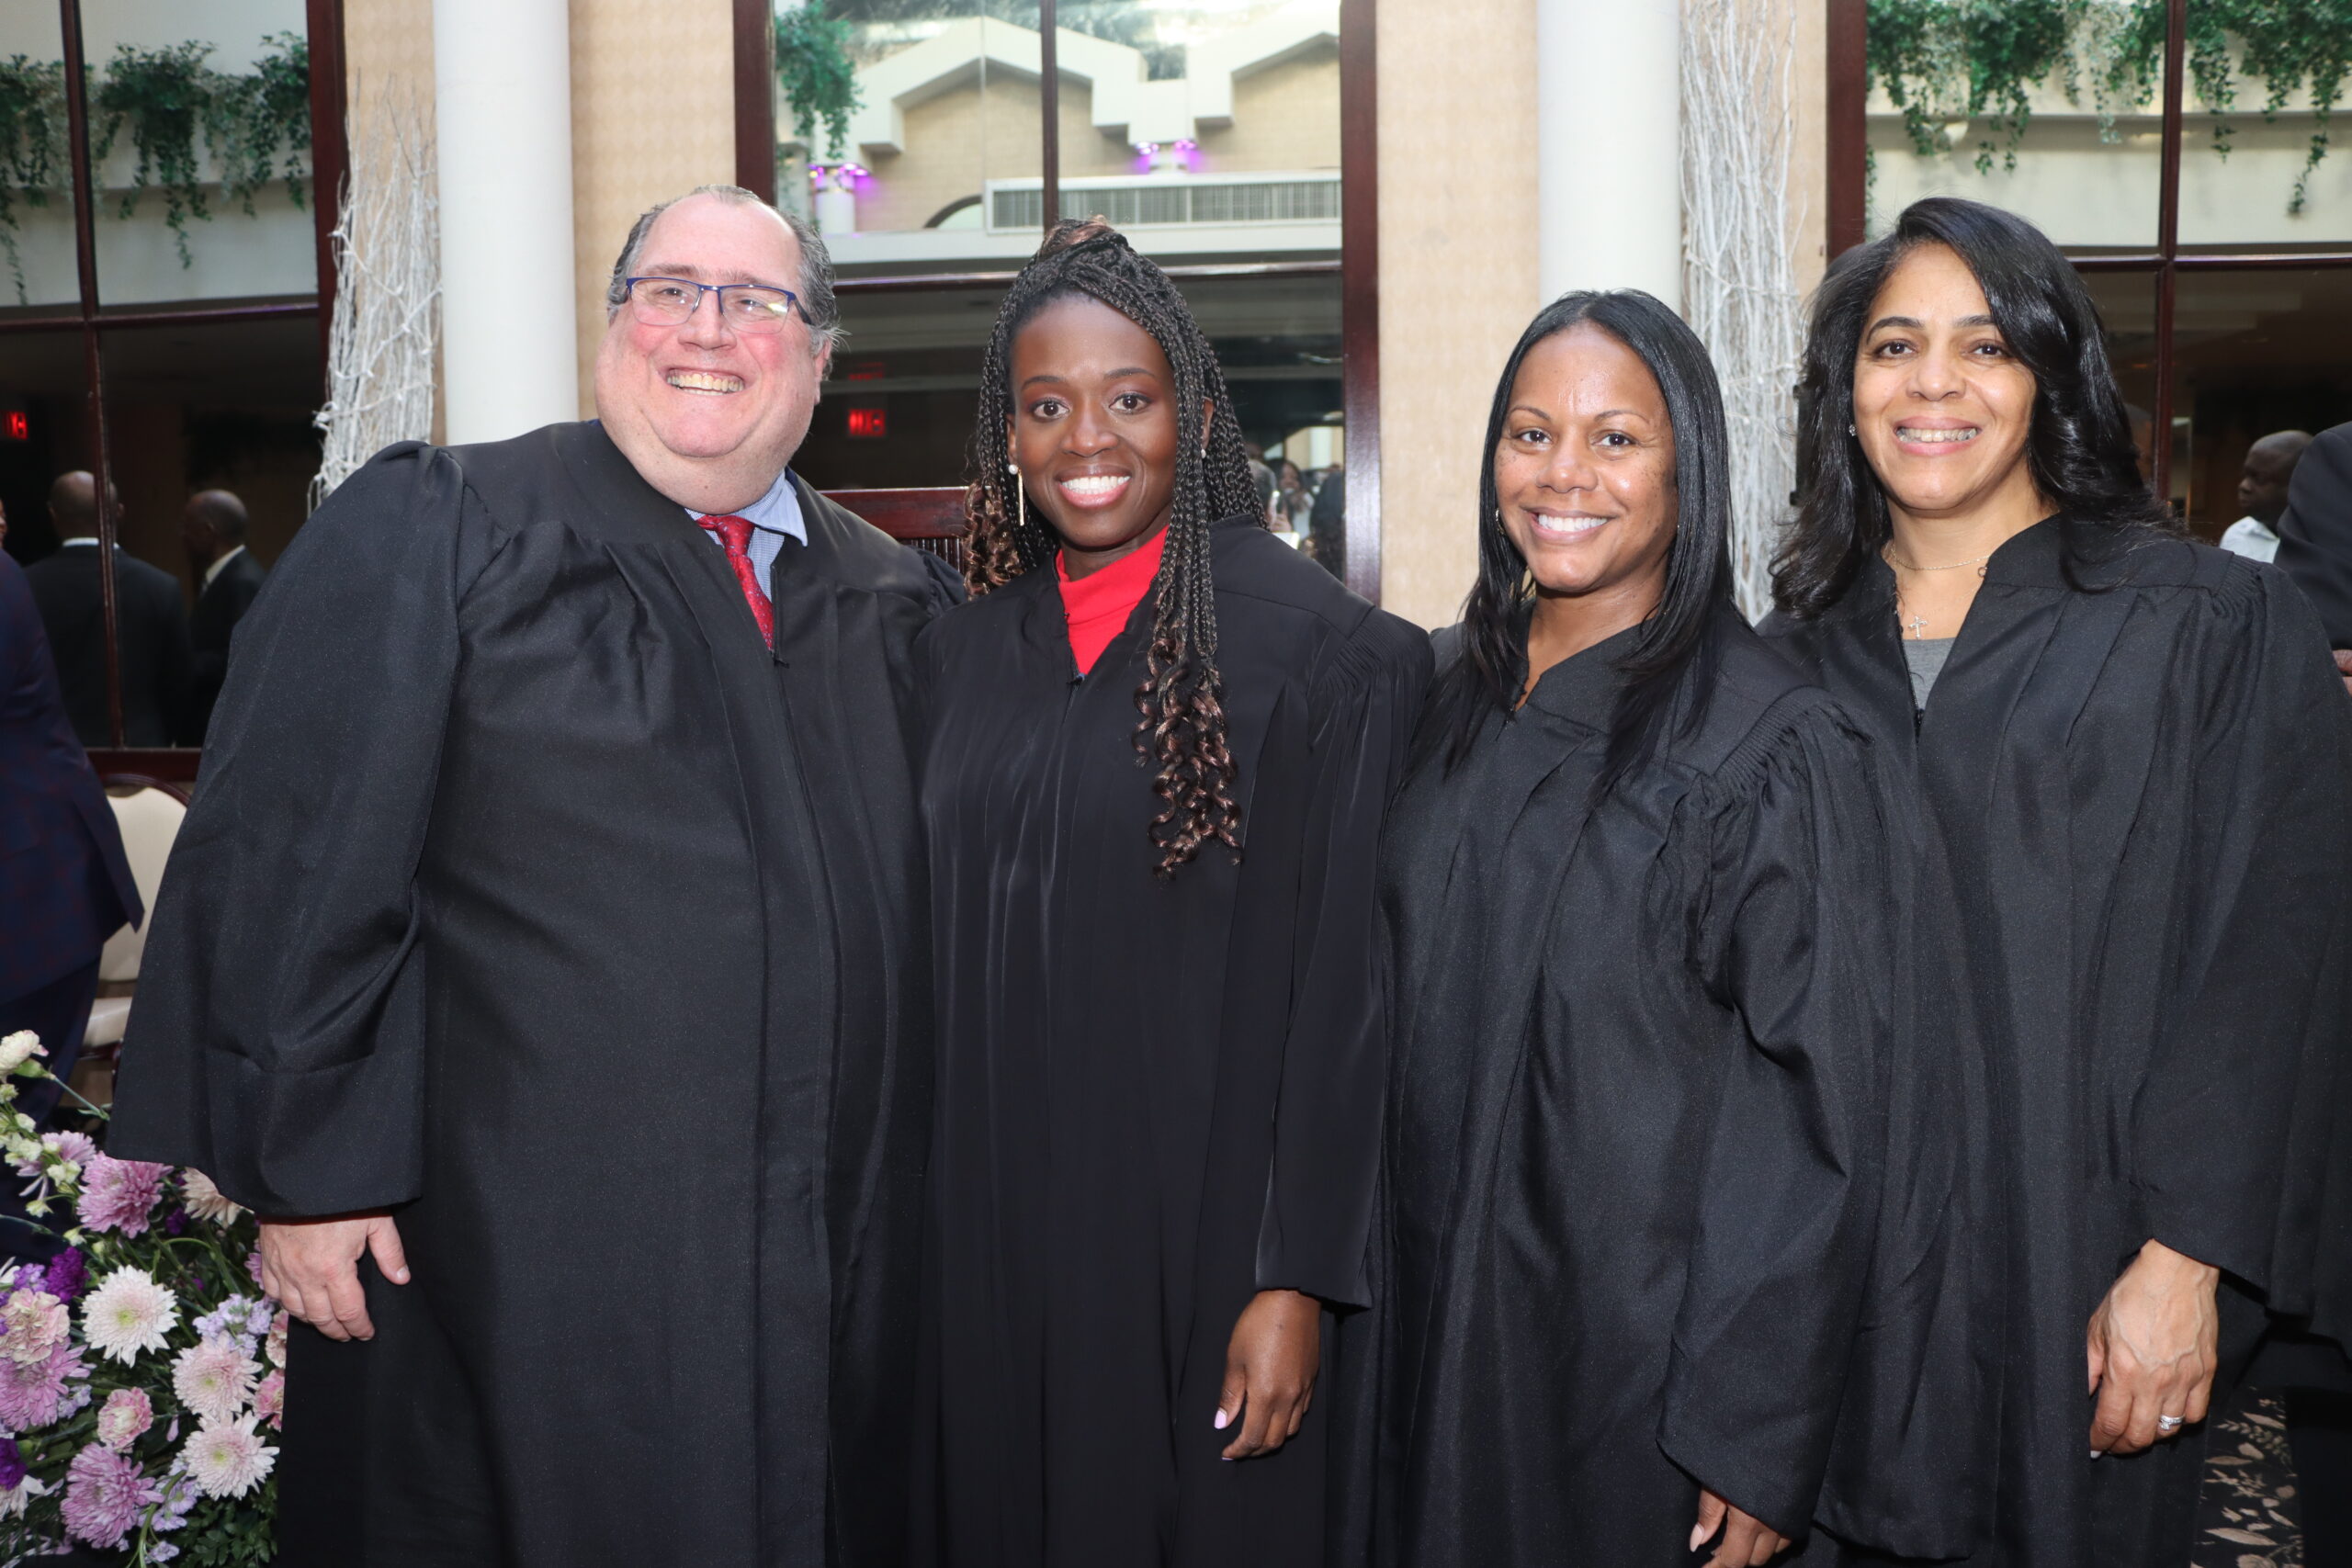 Recently inducted Judges Brian Gottlieb, Betsey Jean-Jacques, Monique Holaman and Linda Wilson.